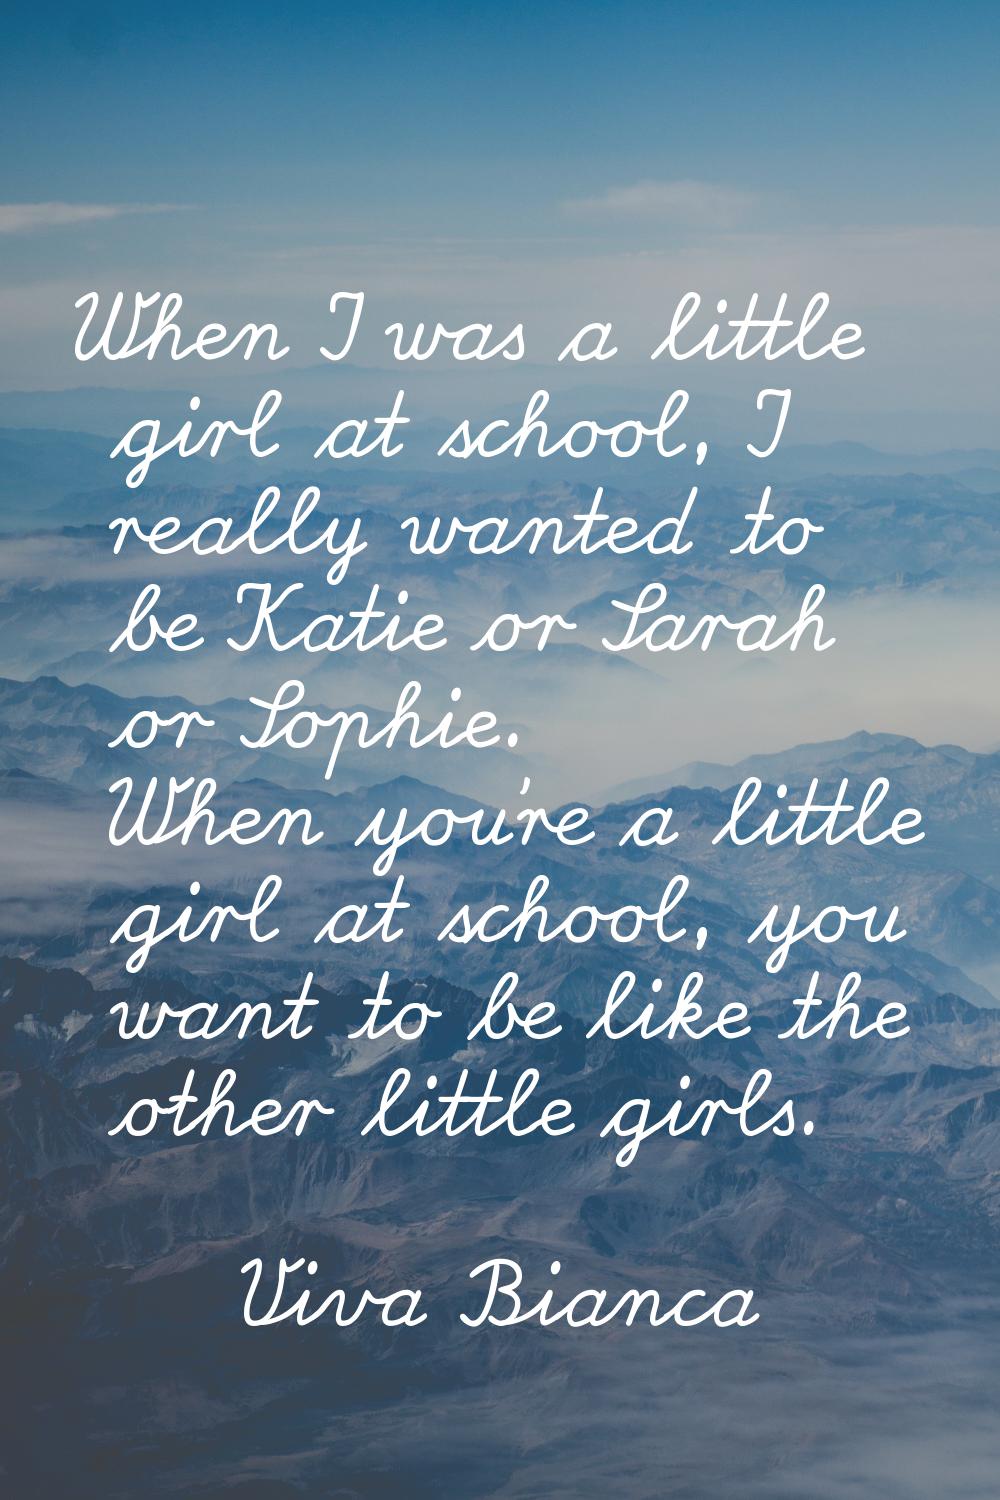 When I was a little girl at school, I really wanted to be Katie or Sarah or Sophie. When you're a l